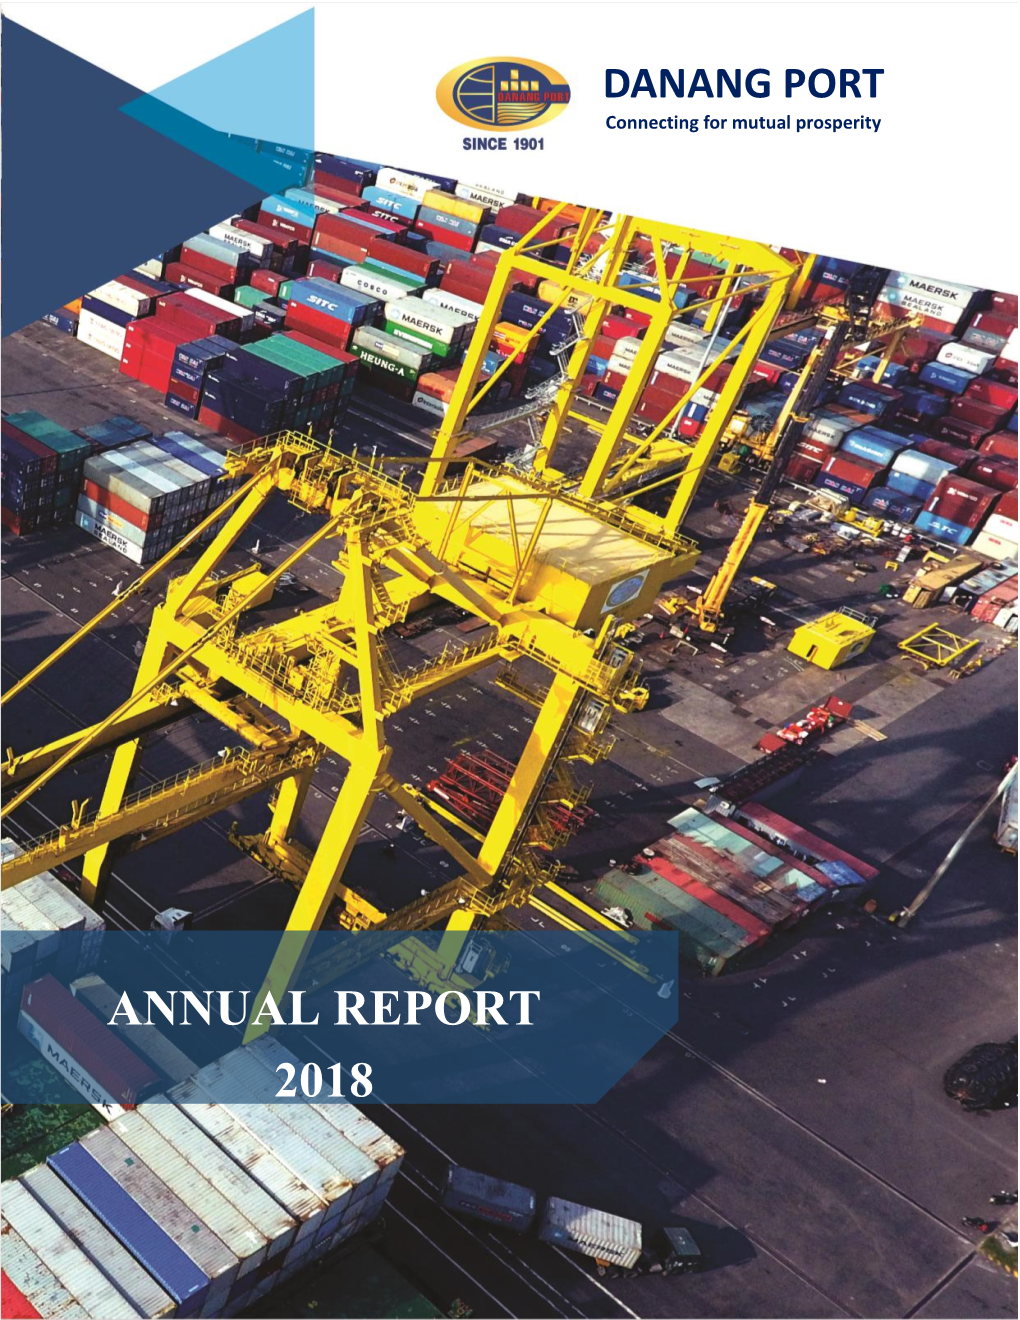 Annual Report 2018 Danang Port Joint Stock Company